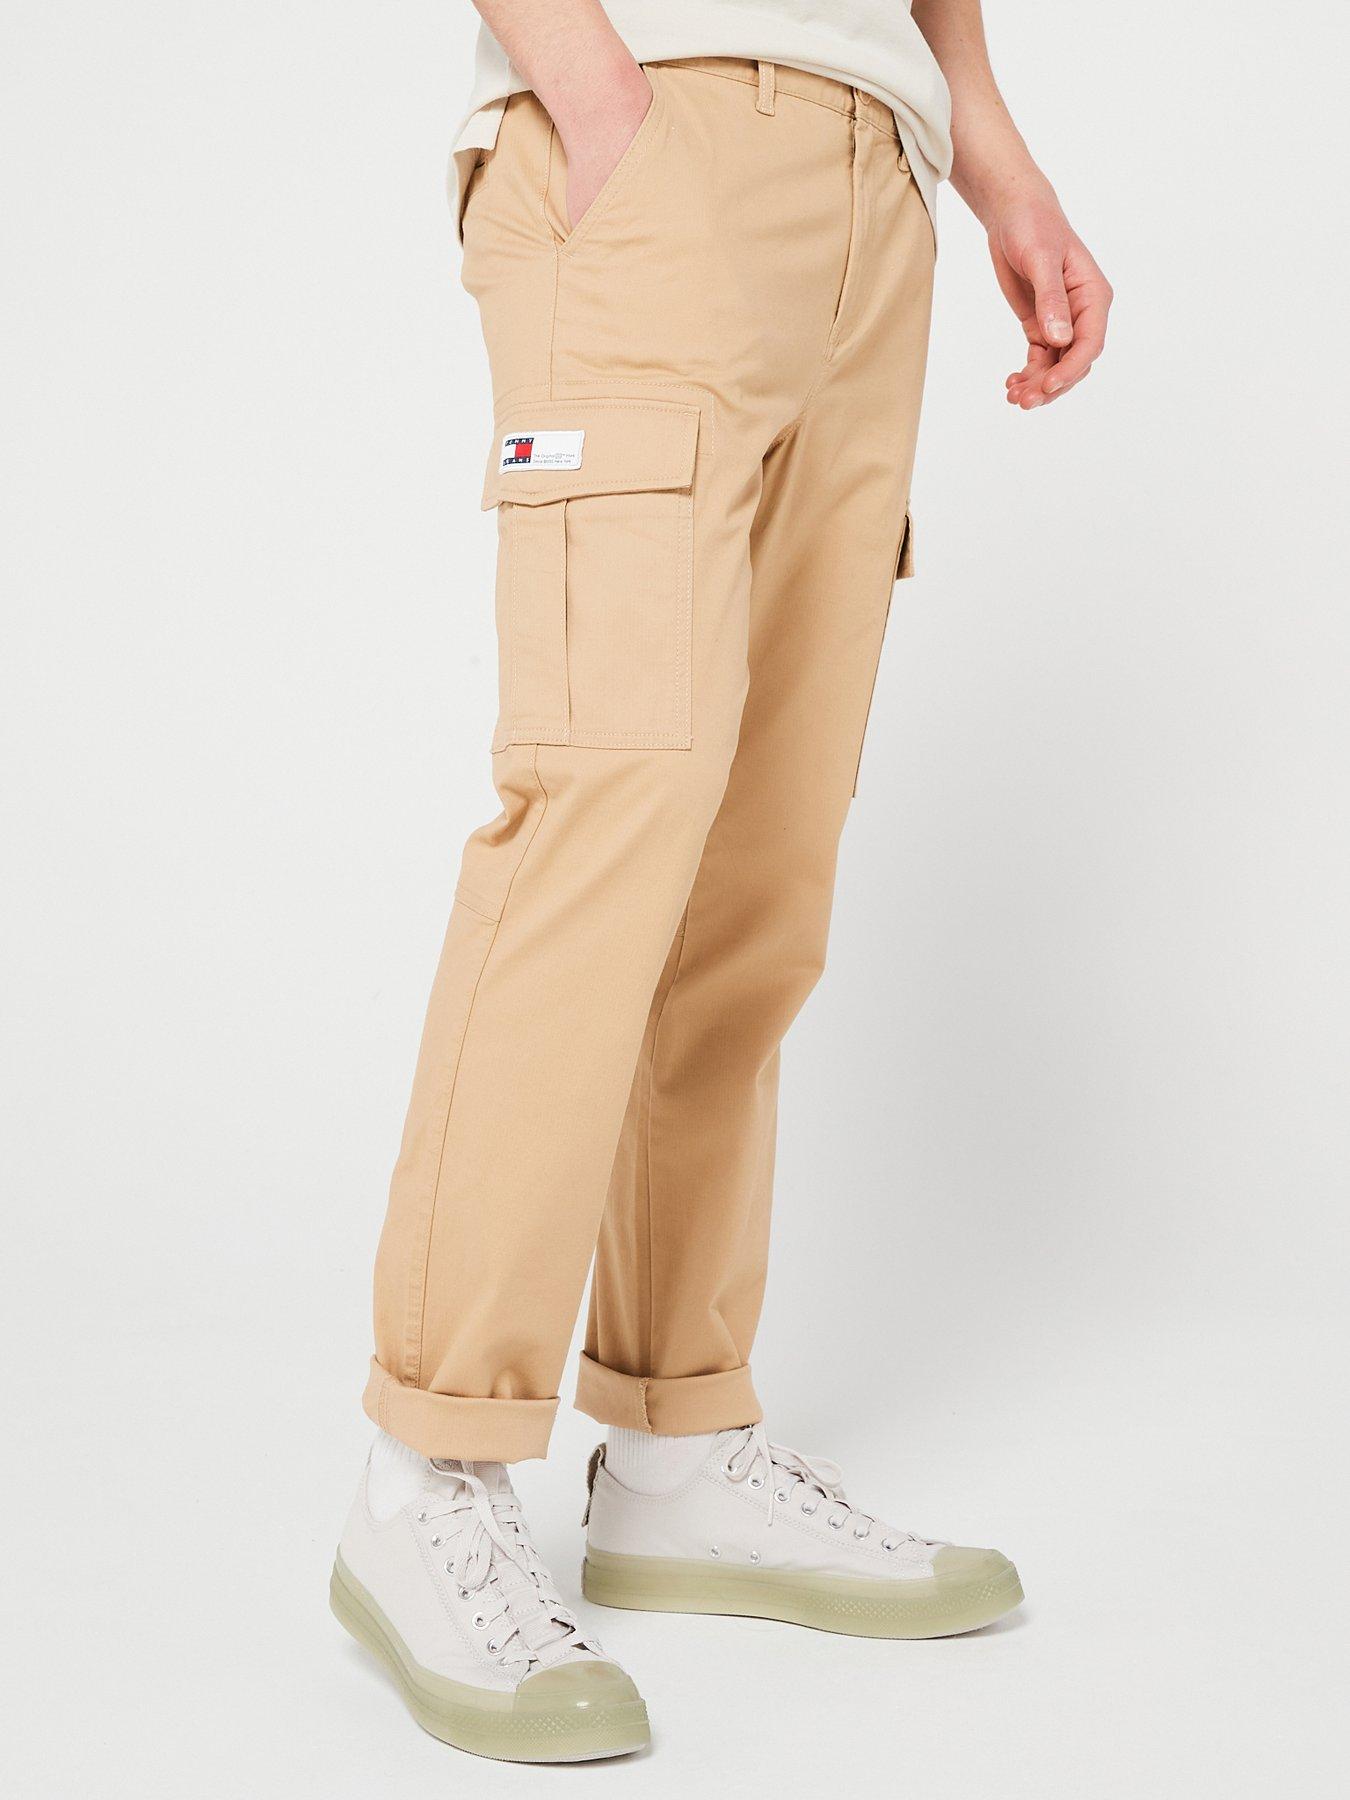 Tommy Jeans ETHAN - Cargo trousers - twilight navy/dark blue